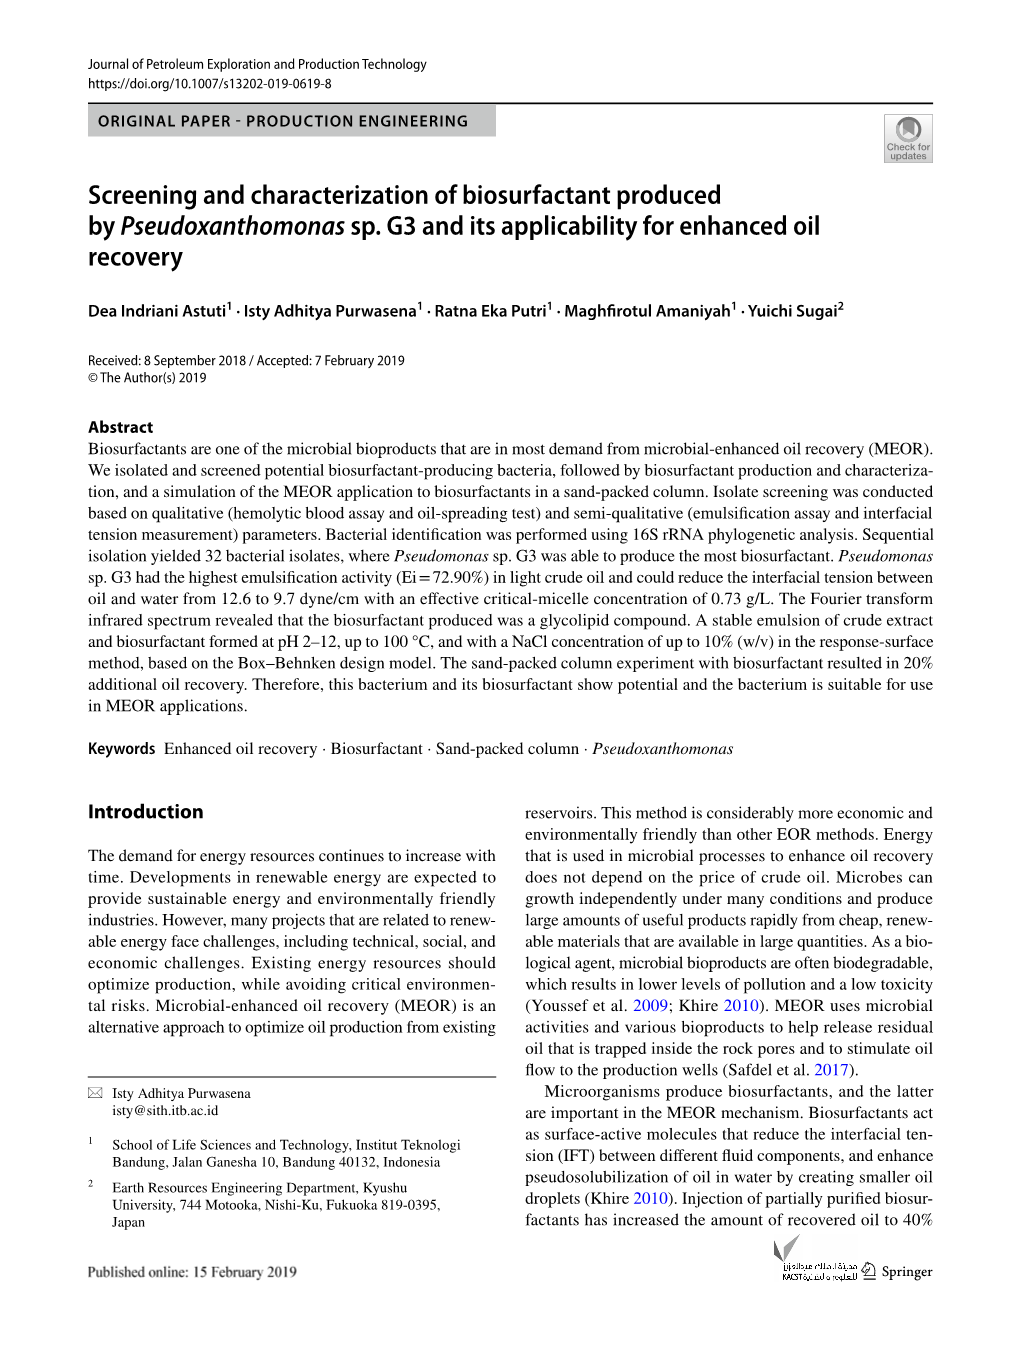 Screening and Characterization of Biosurfactant Produced by Pseudoxanthomonas Sp